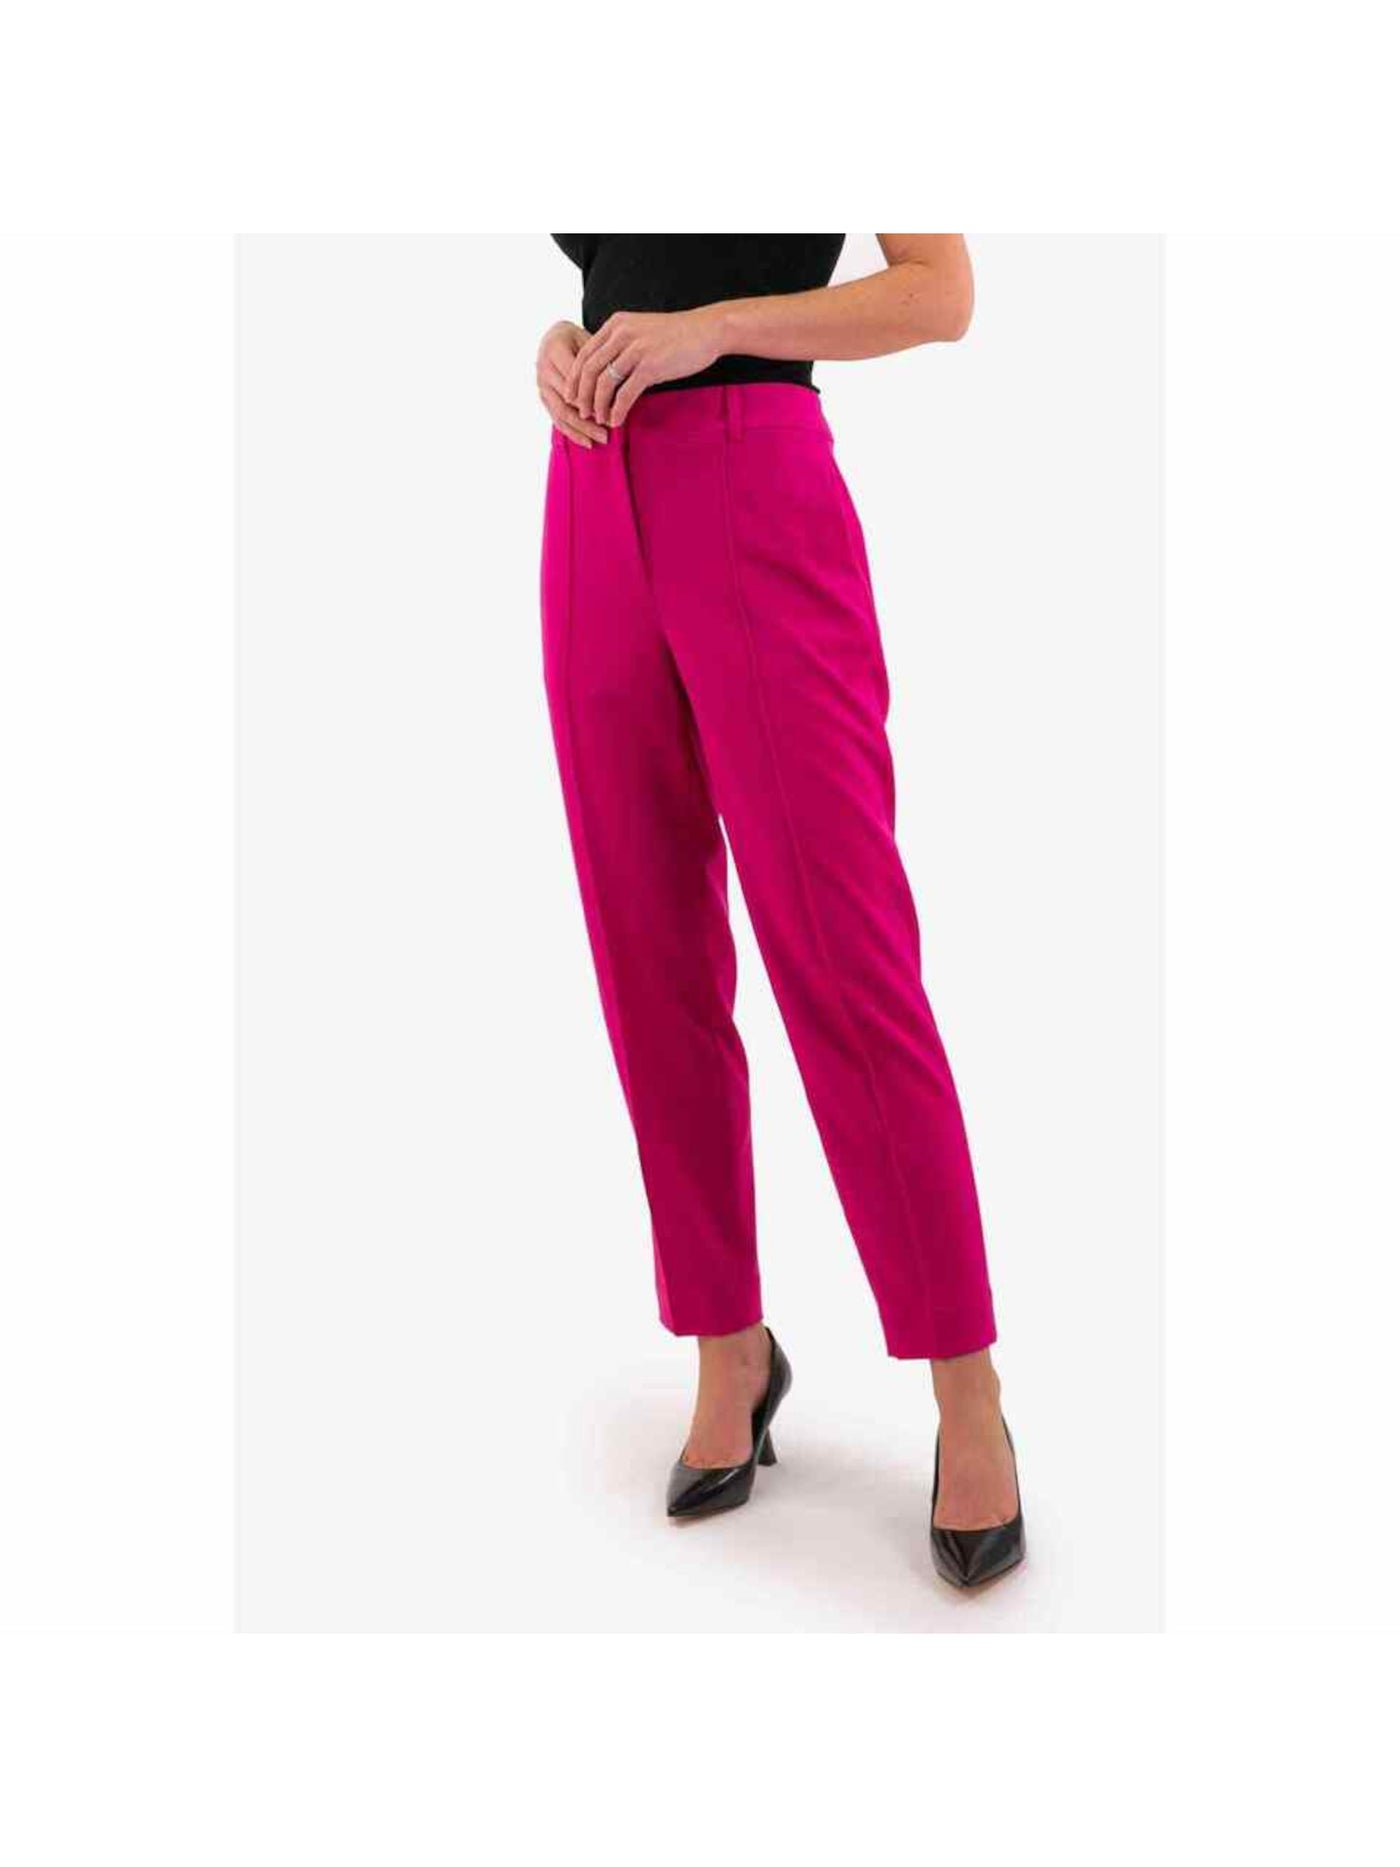 MICHAEL MICHAEL KORS Womens Pink Zippered Pocketed Slim Ankle Wear To Work High Waist Pants 14